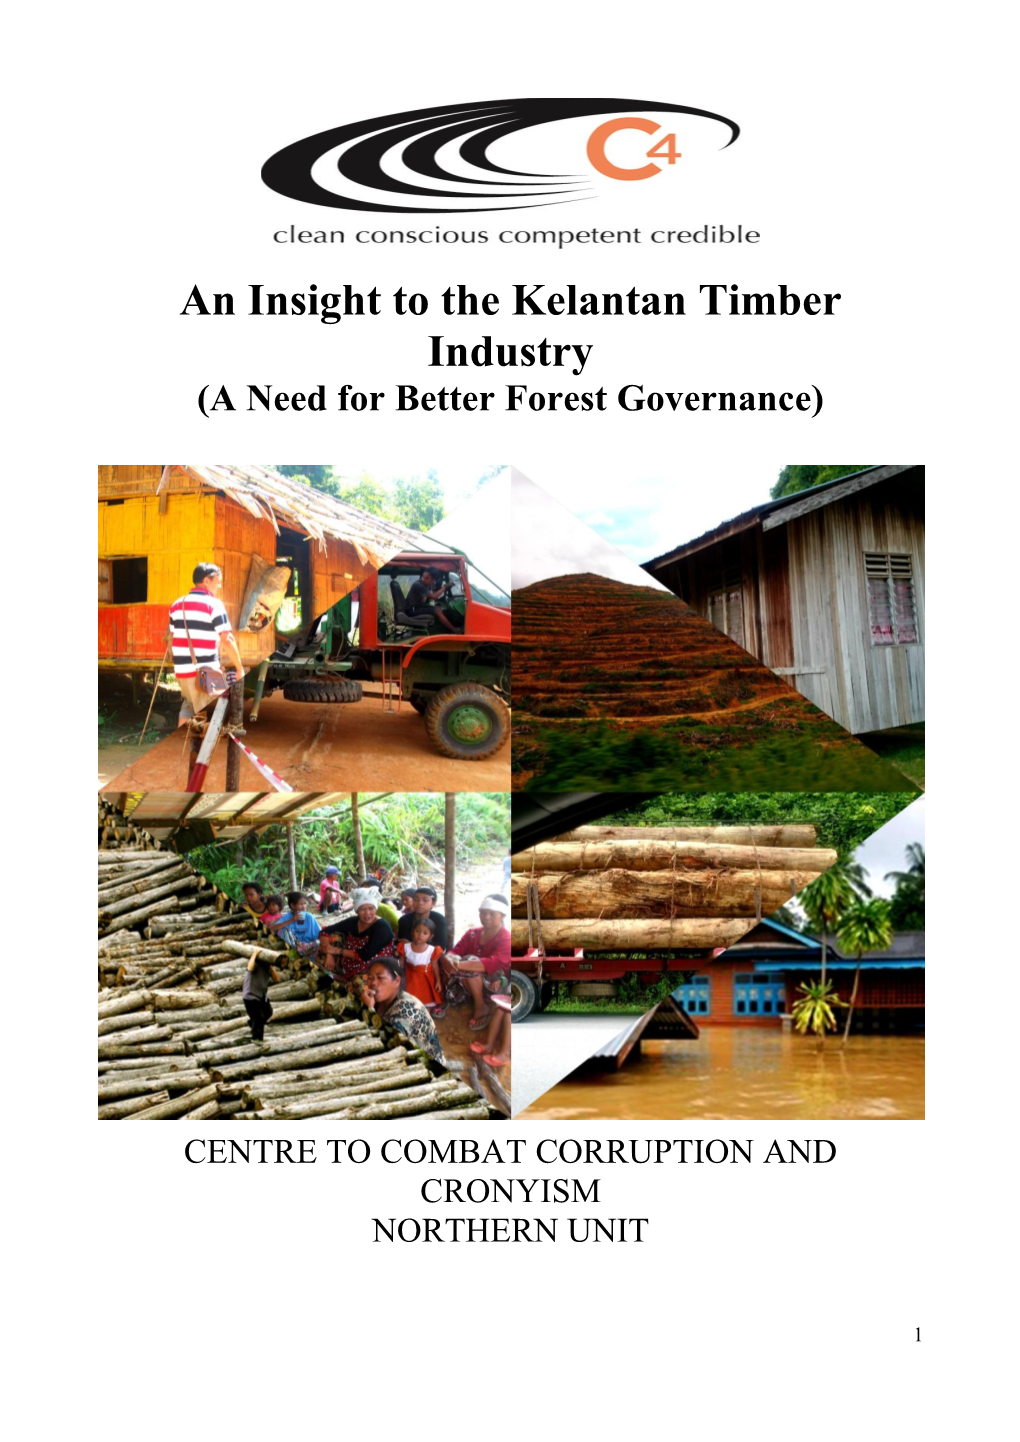 An Insight to the Kelantan Timber Industry (A Need for Better Forest Governance)